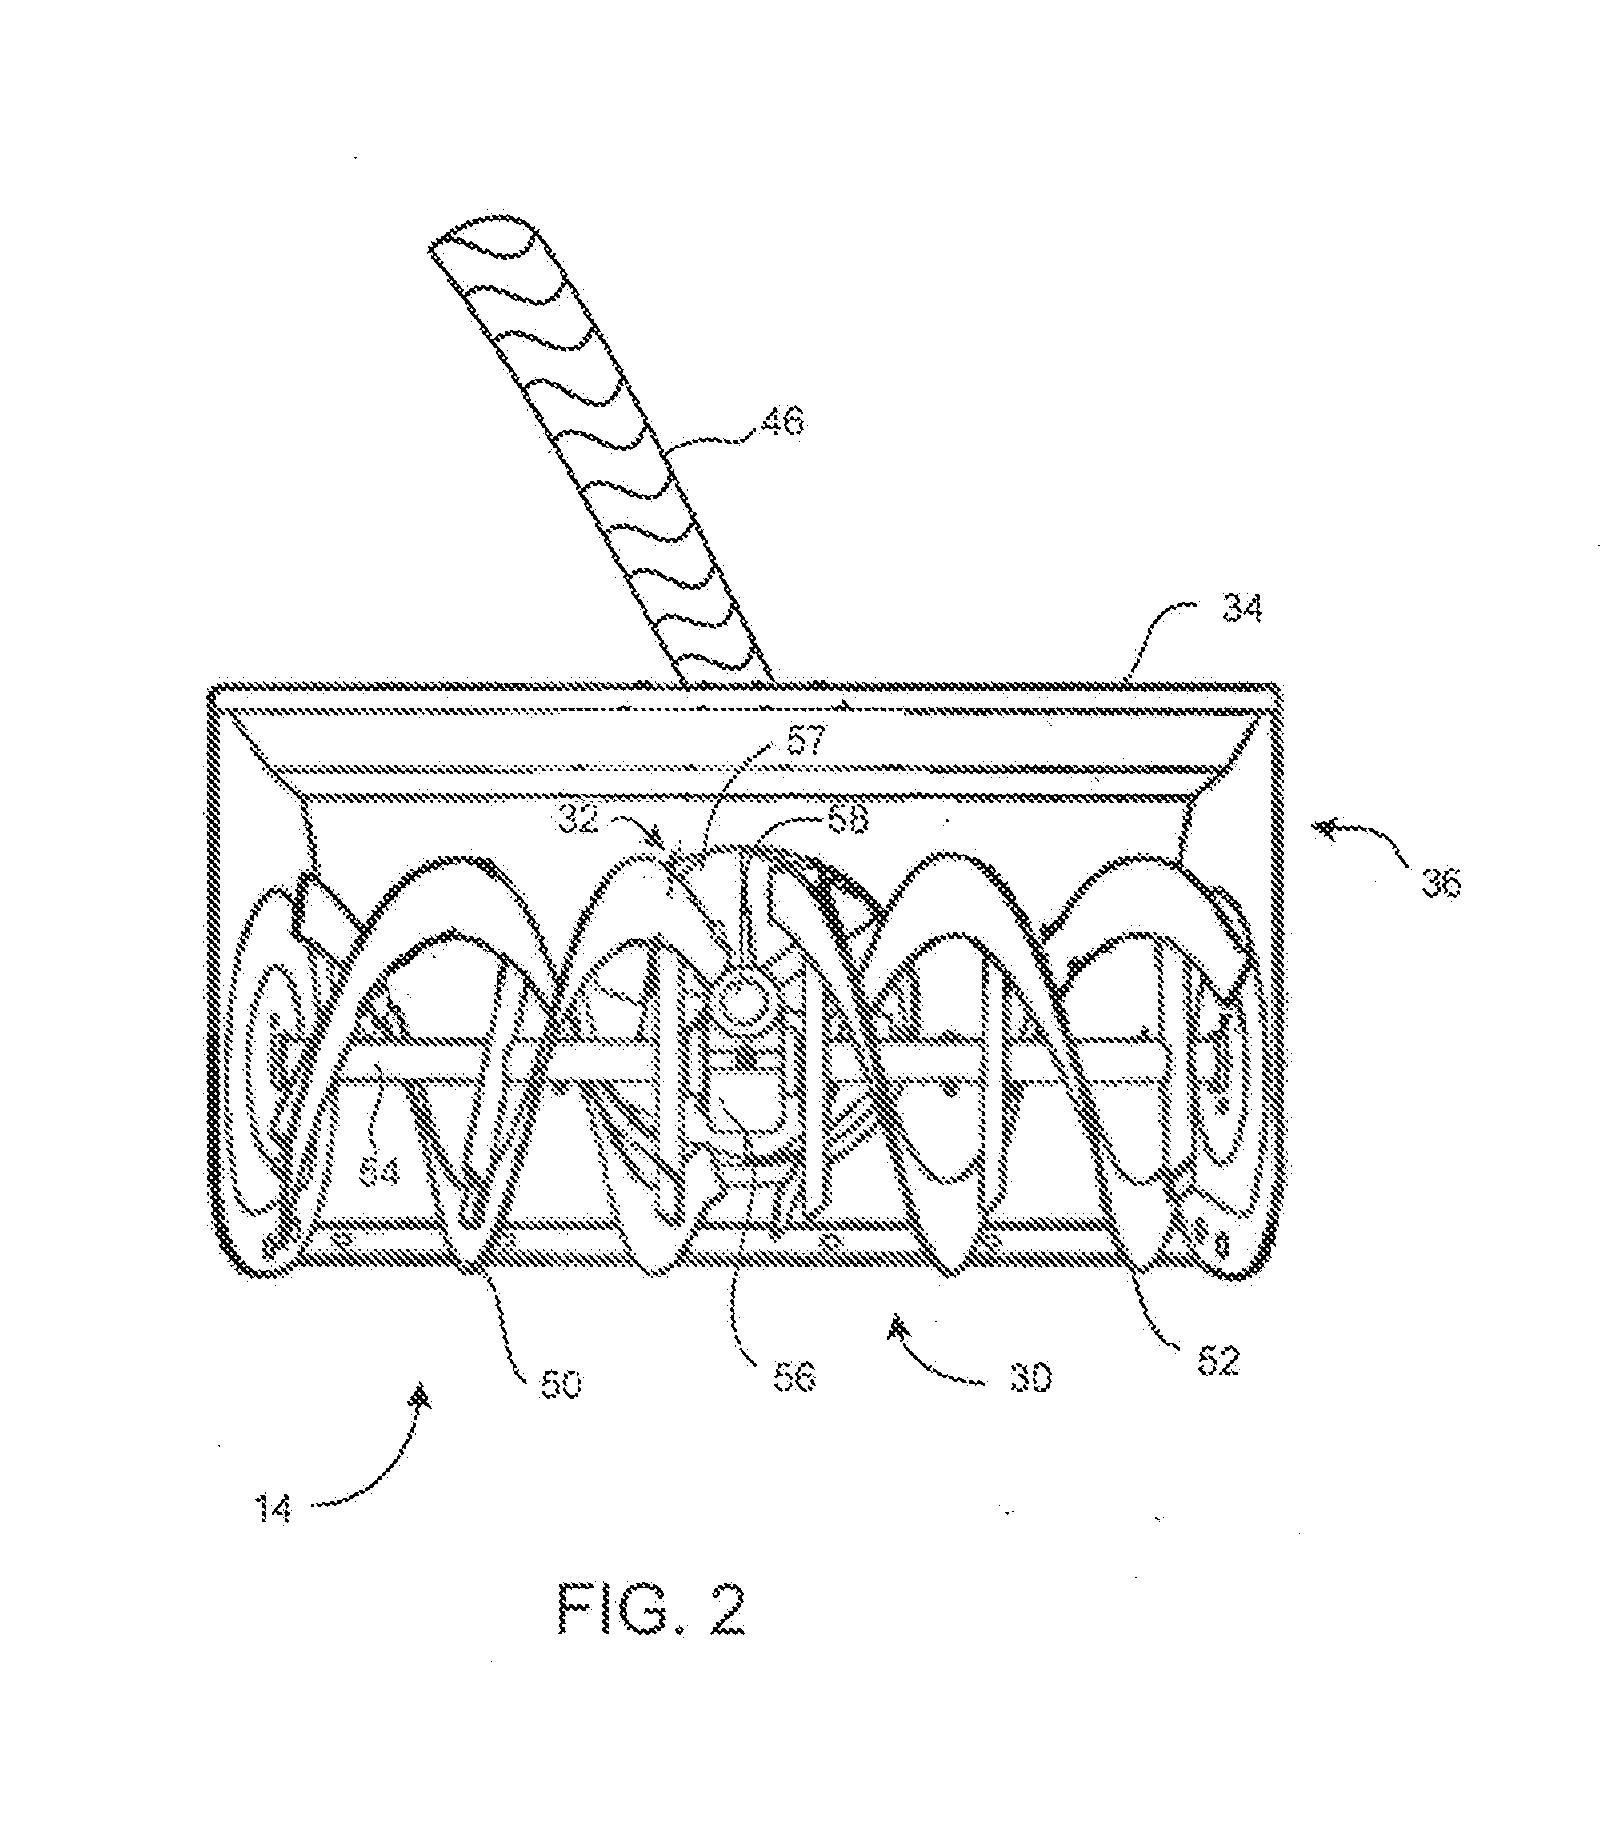 Apparatus and method for mitigating freezing of a snow handling mechanism in a snow blower